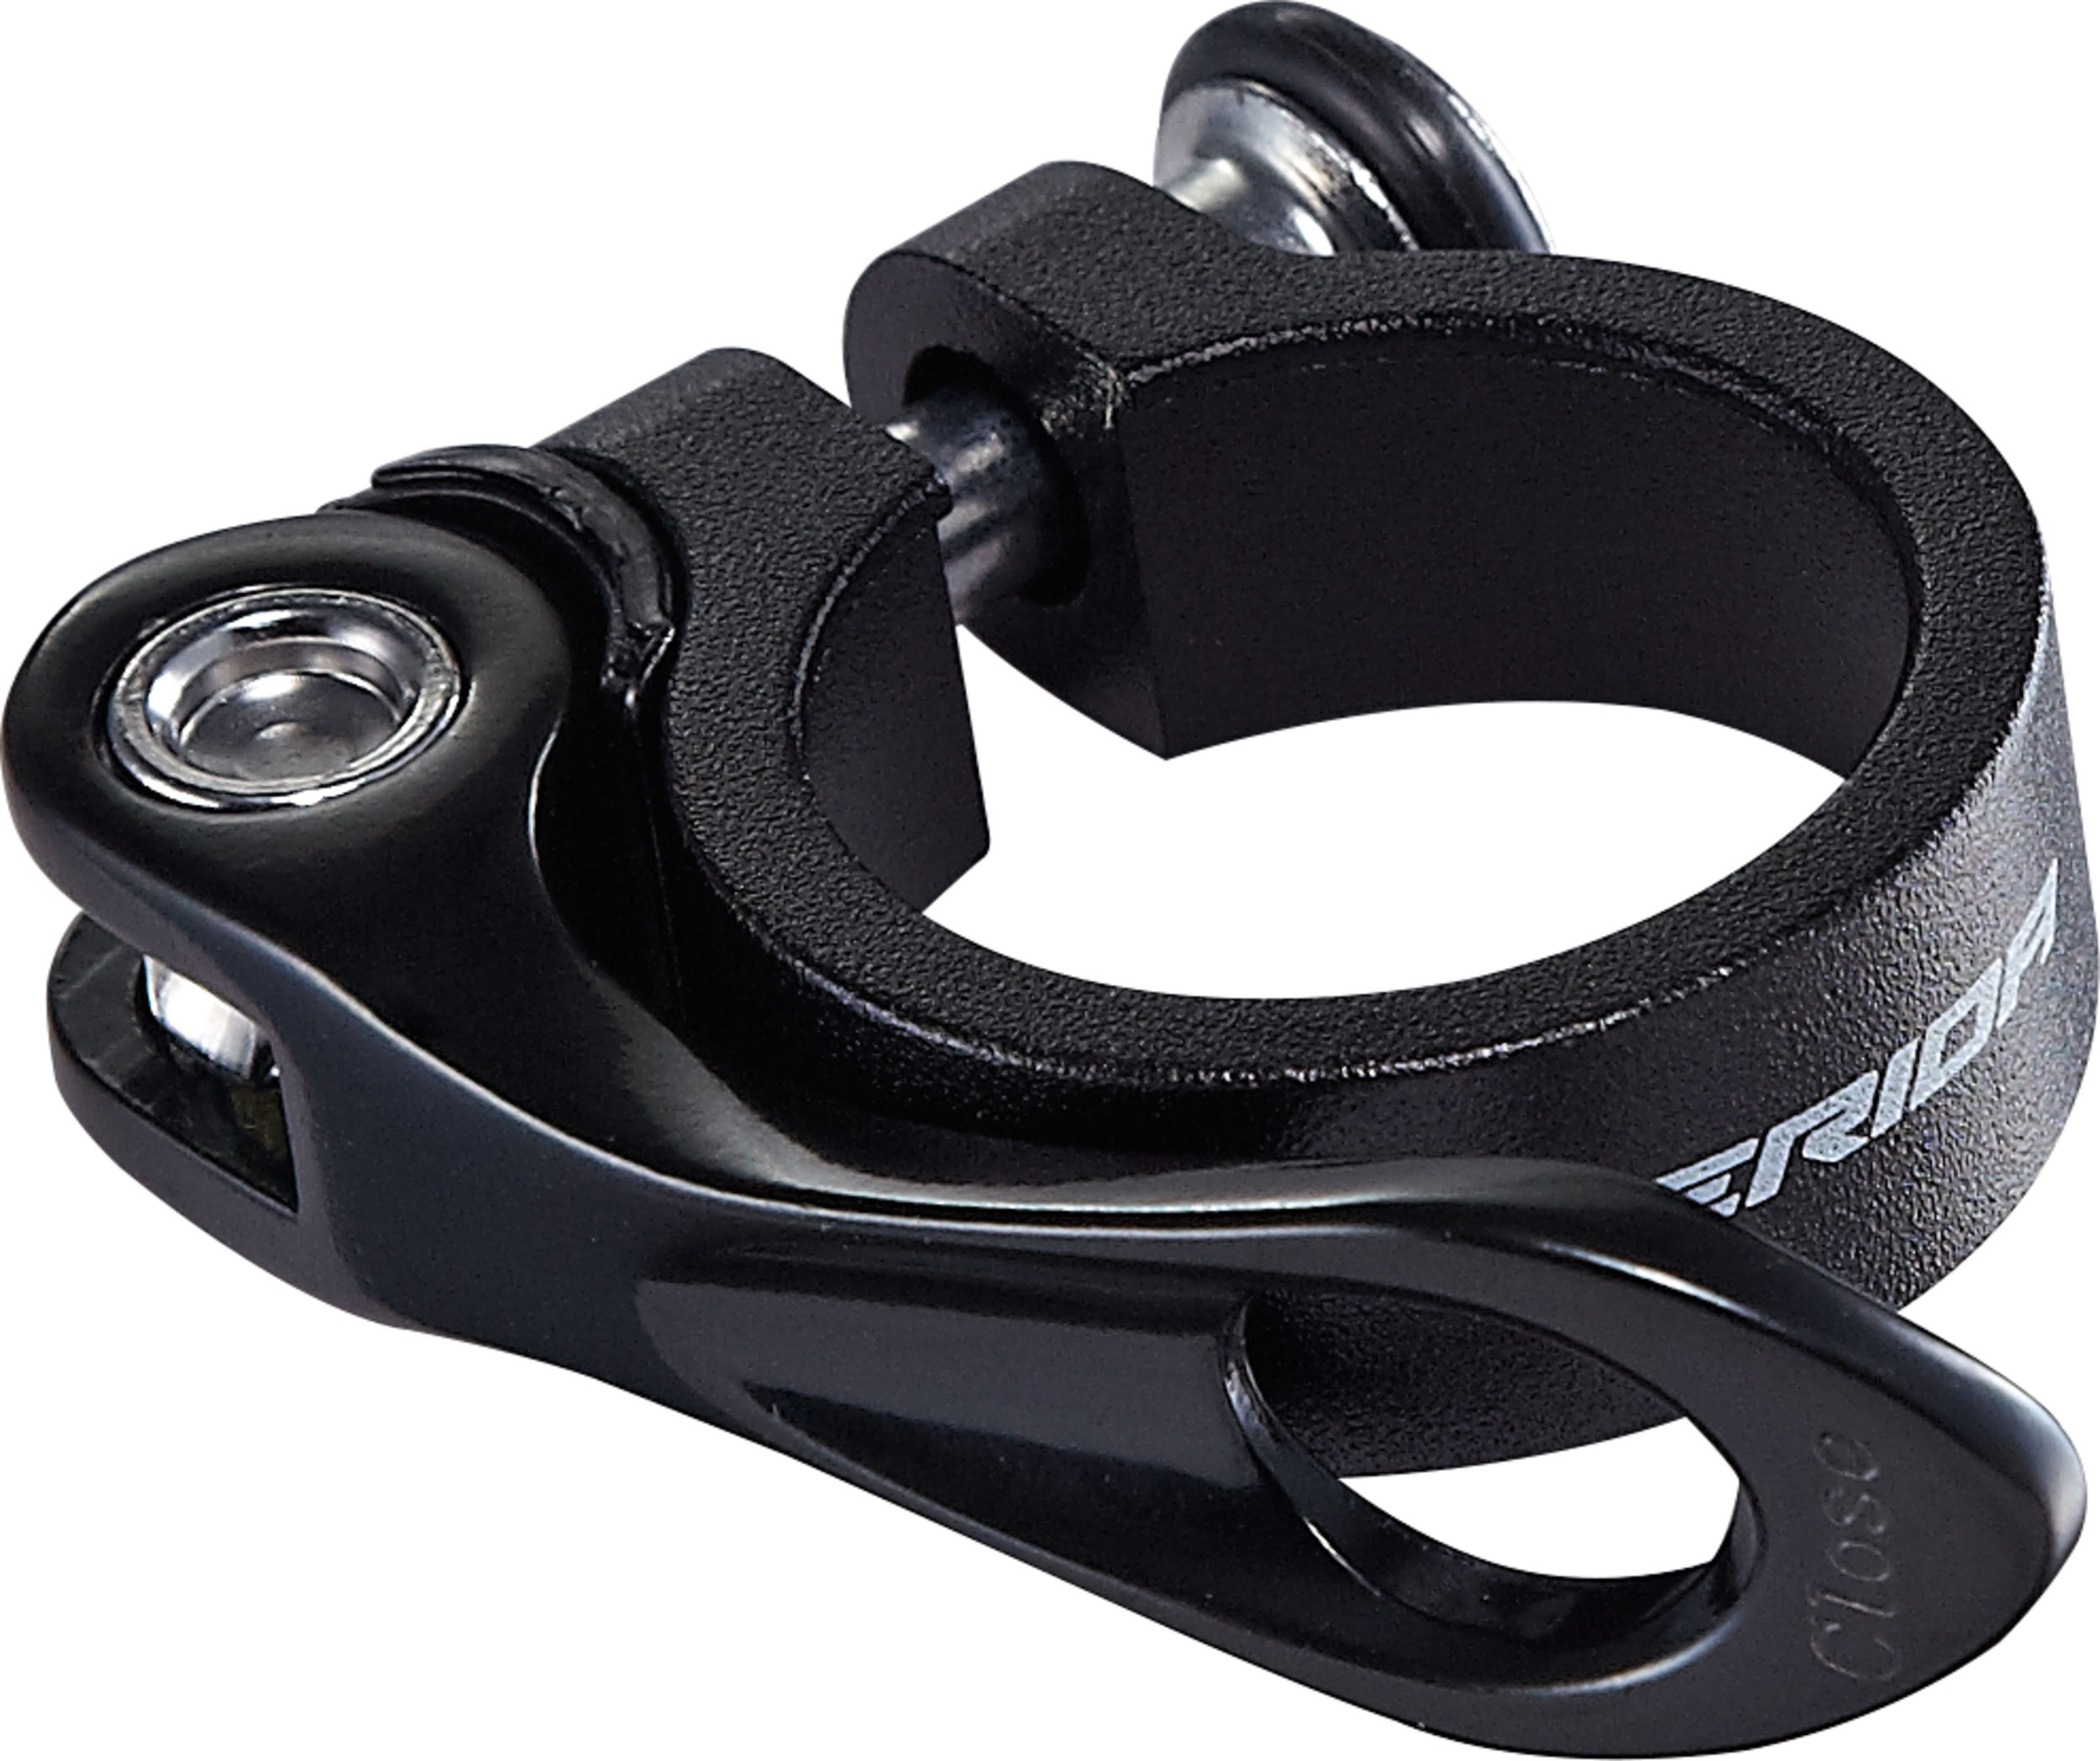 uss Passend  data-mtsrclang=en-US href=# onclick=return false; 							show original title Details about  / Bicycle Saddle Clamp With Quick Release Clamp Ring and quick release fitting